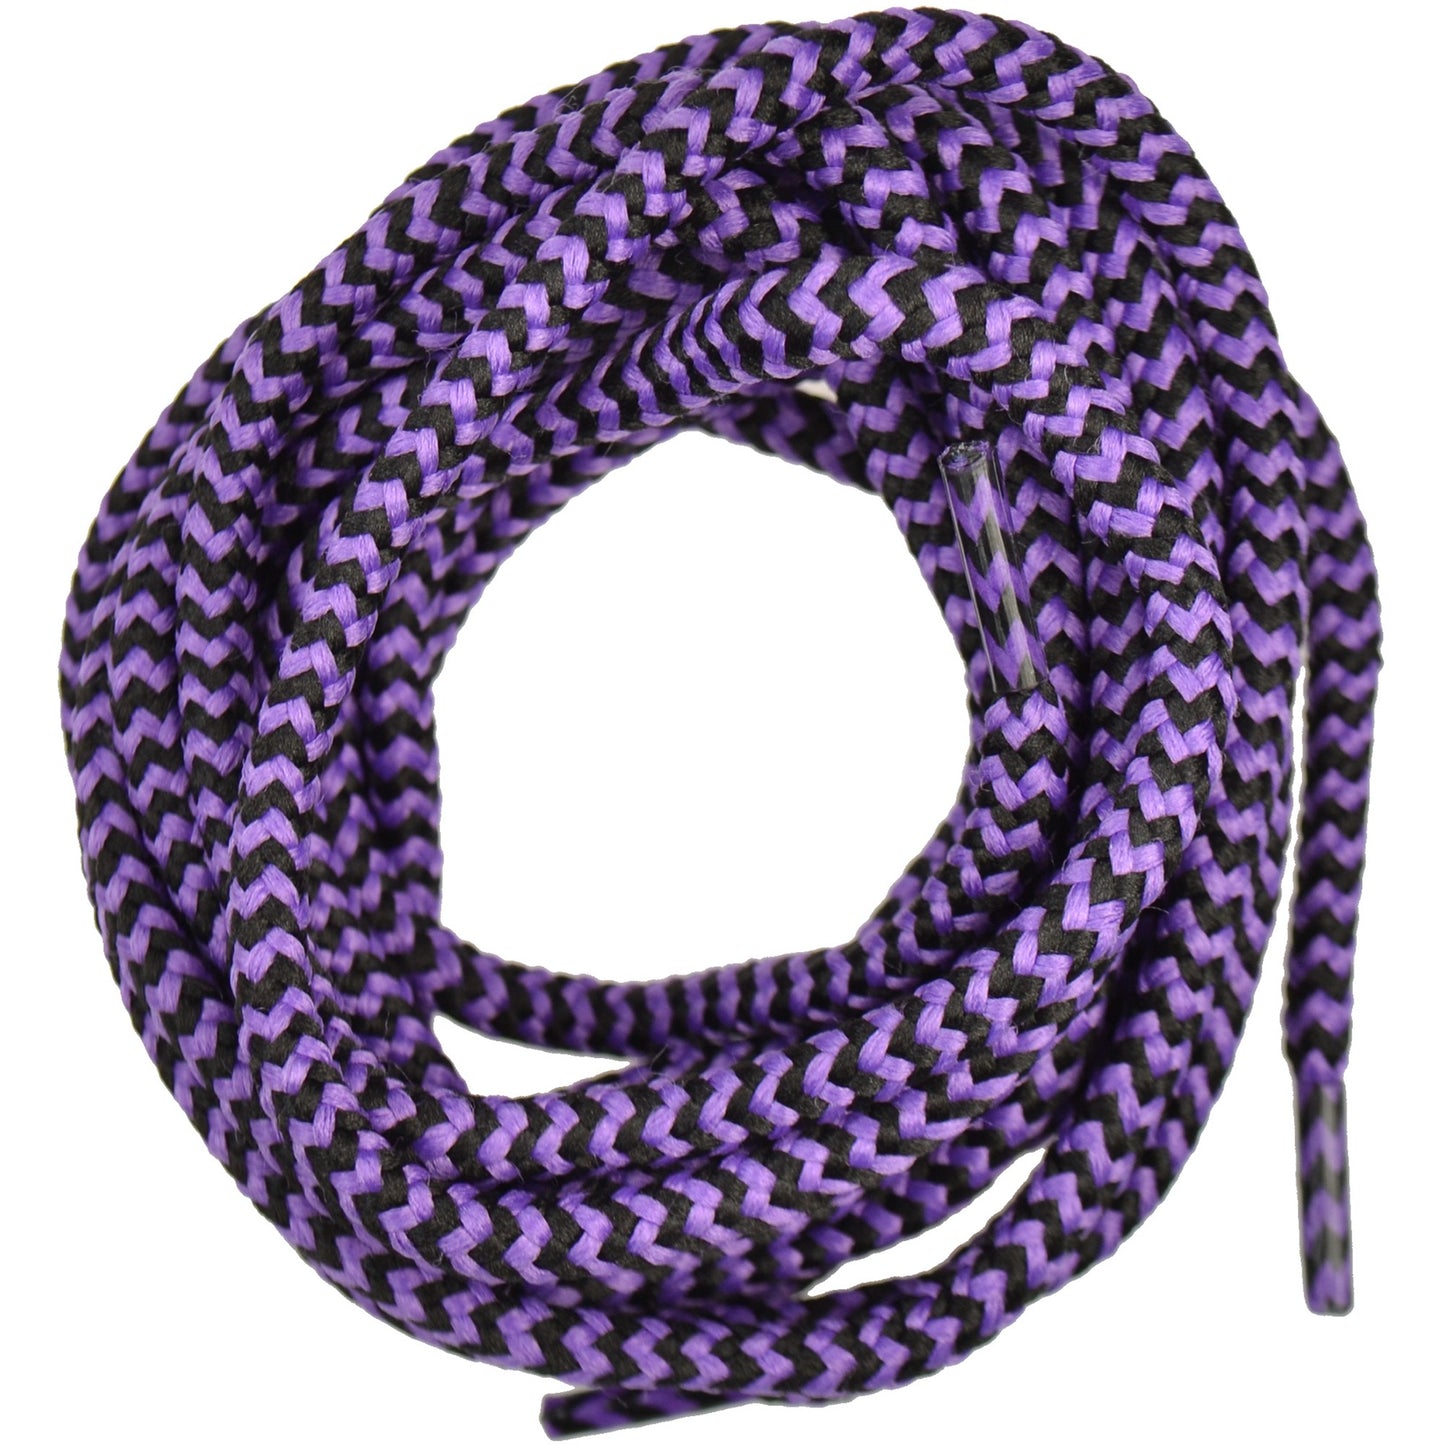 150cm Purple & black dog-tooth walking boot Shoe Laces